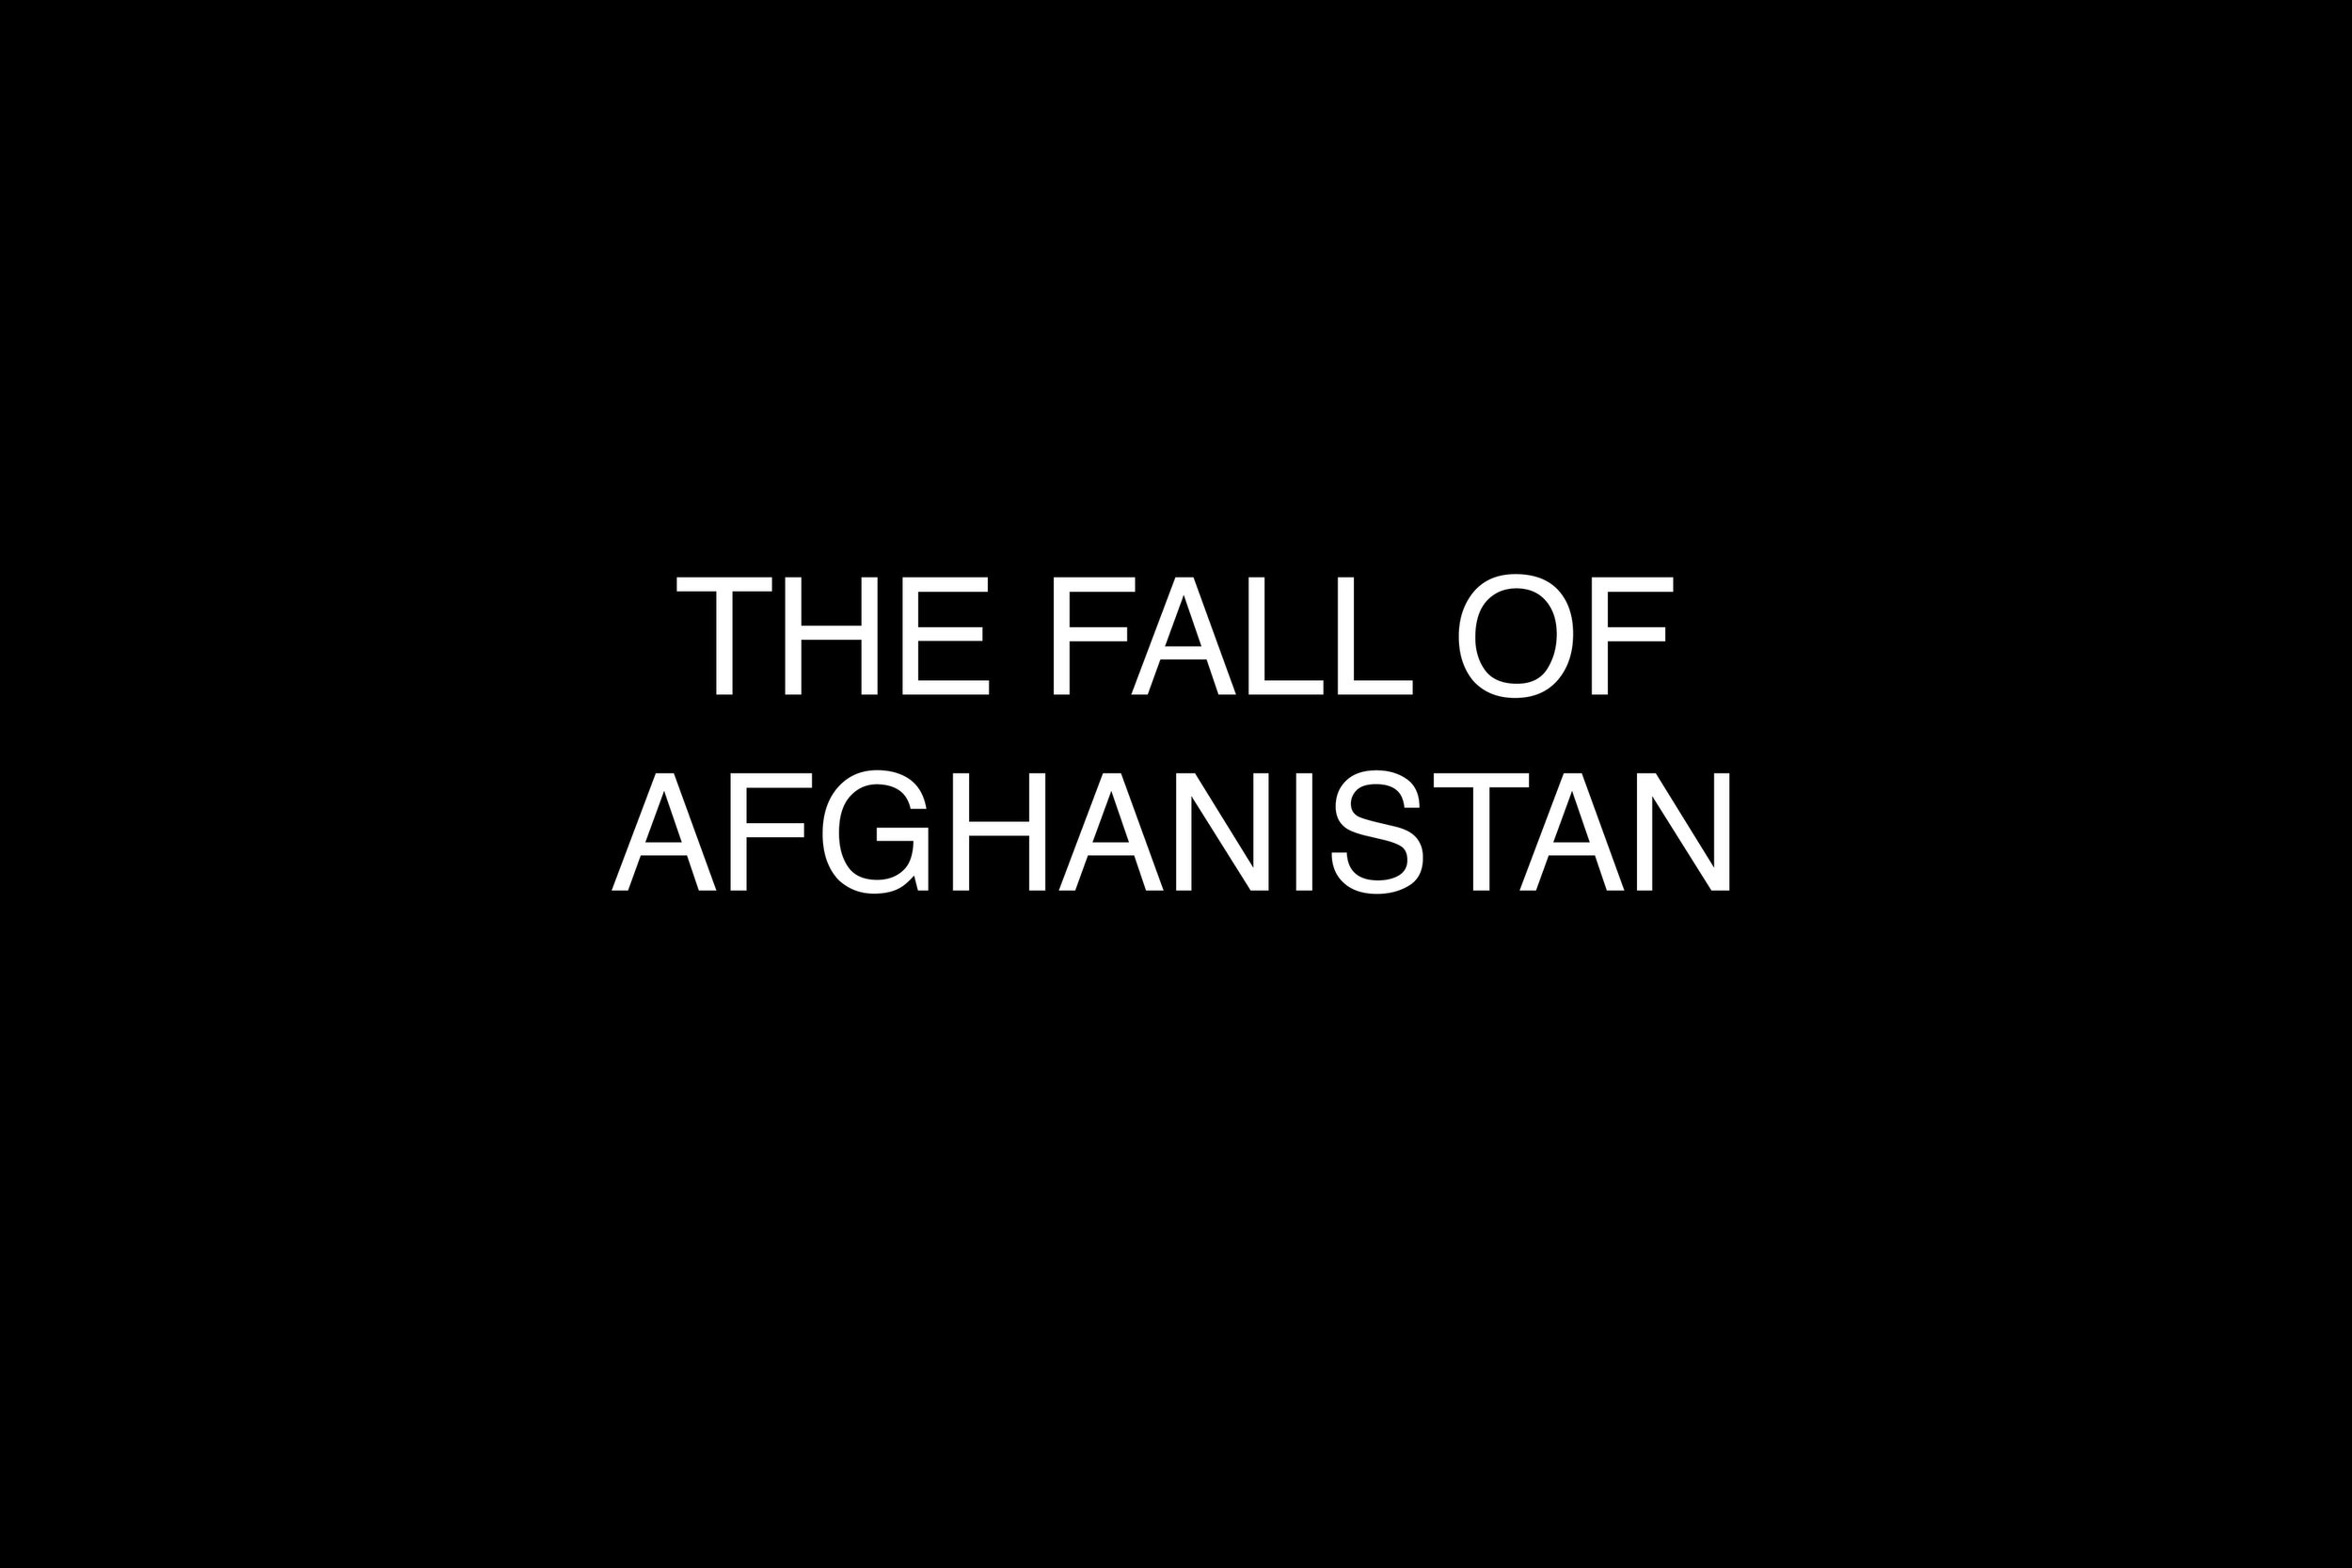  What images can capture a countryÕs collapse? The TalibanÕs offensive was relentless, steamrolling through city after city until the fighters reached the gates of Kabul. There was no last stand: Afghan President Ashraf Ghani and his coterie escaped 